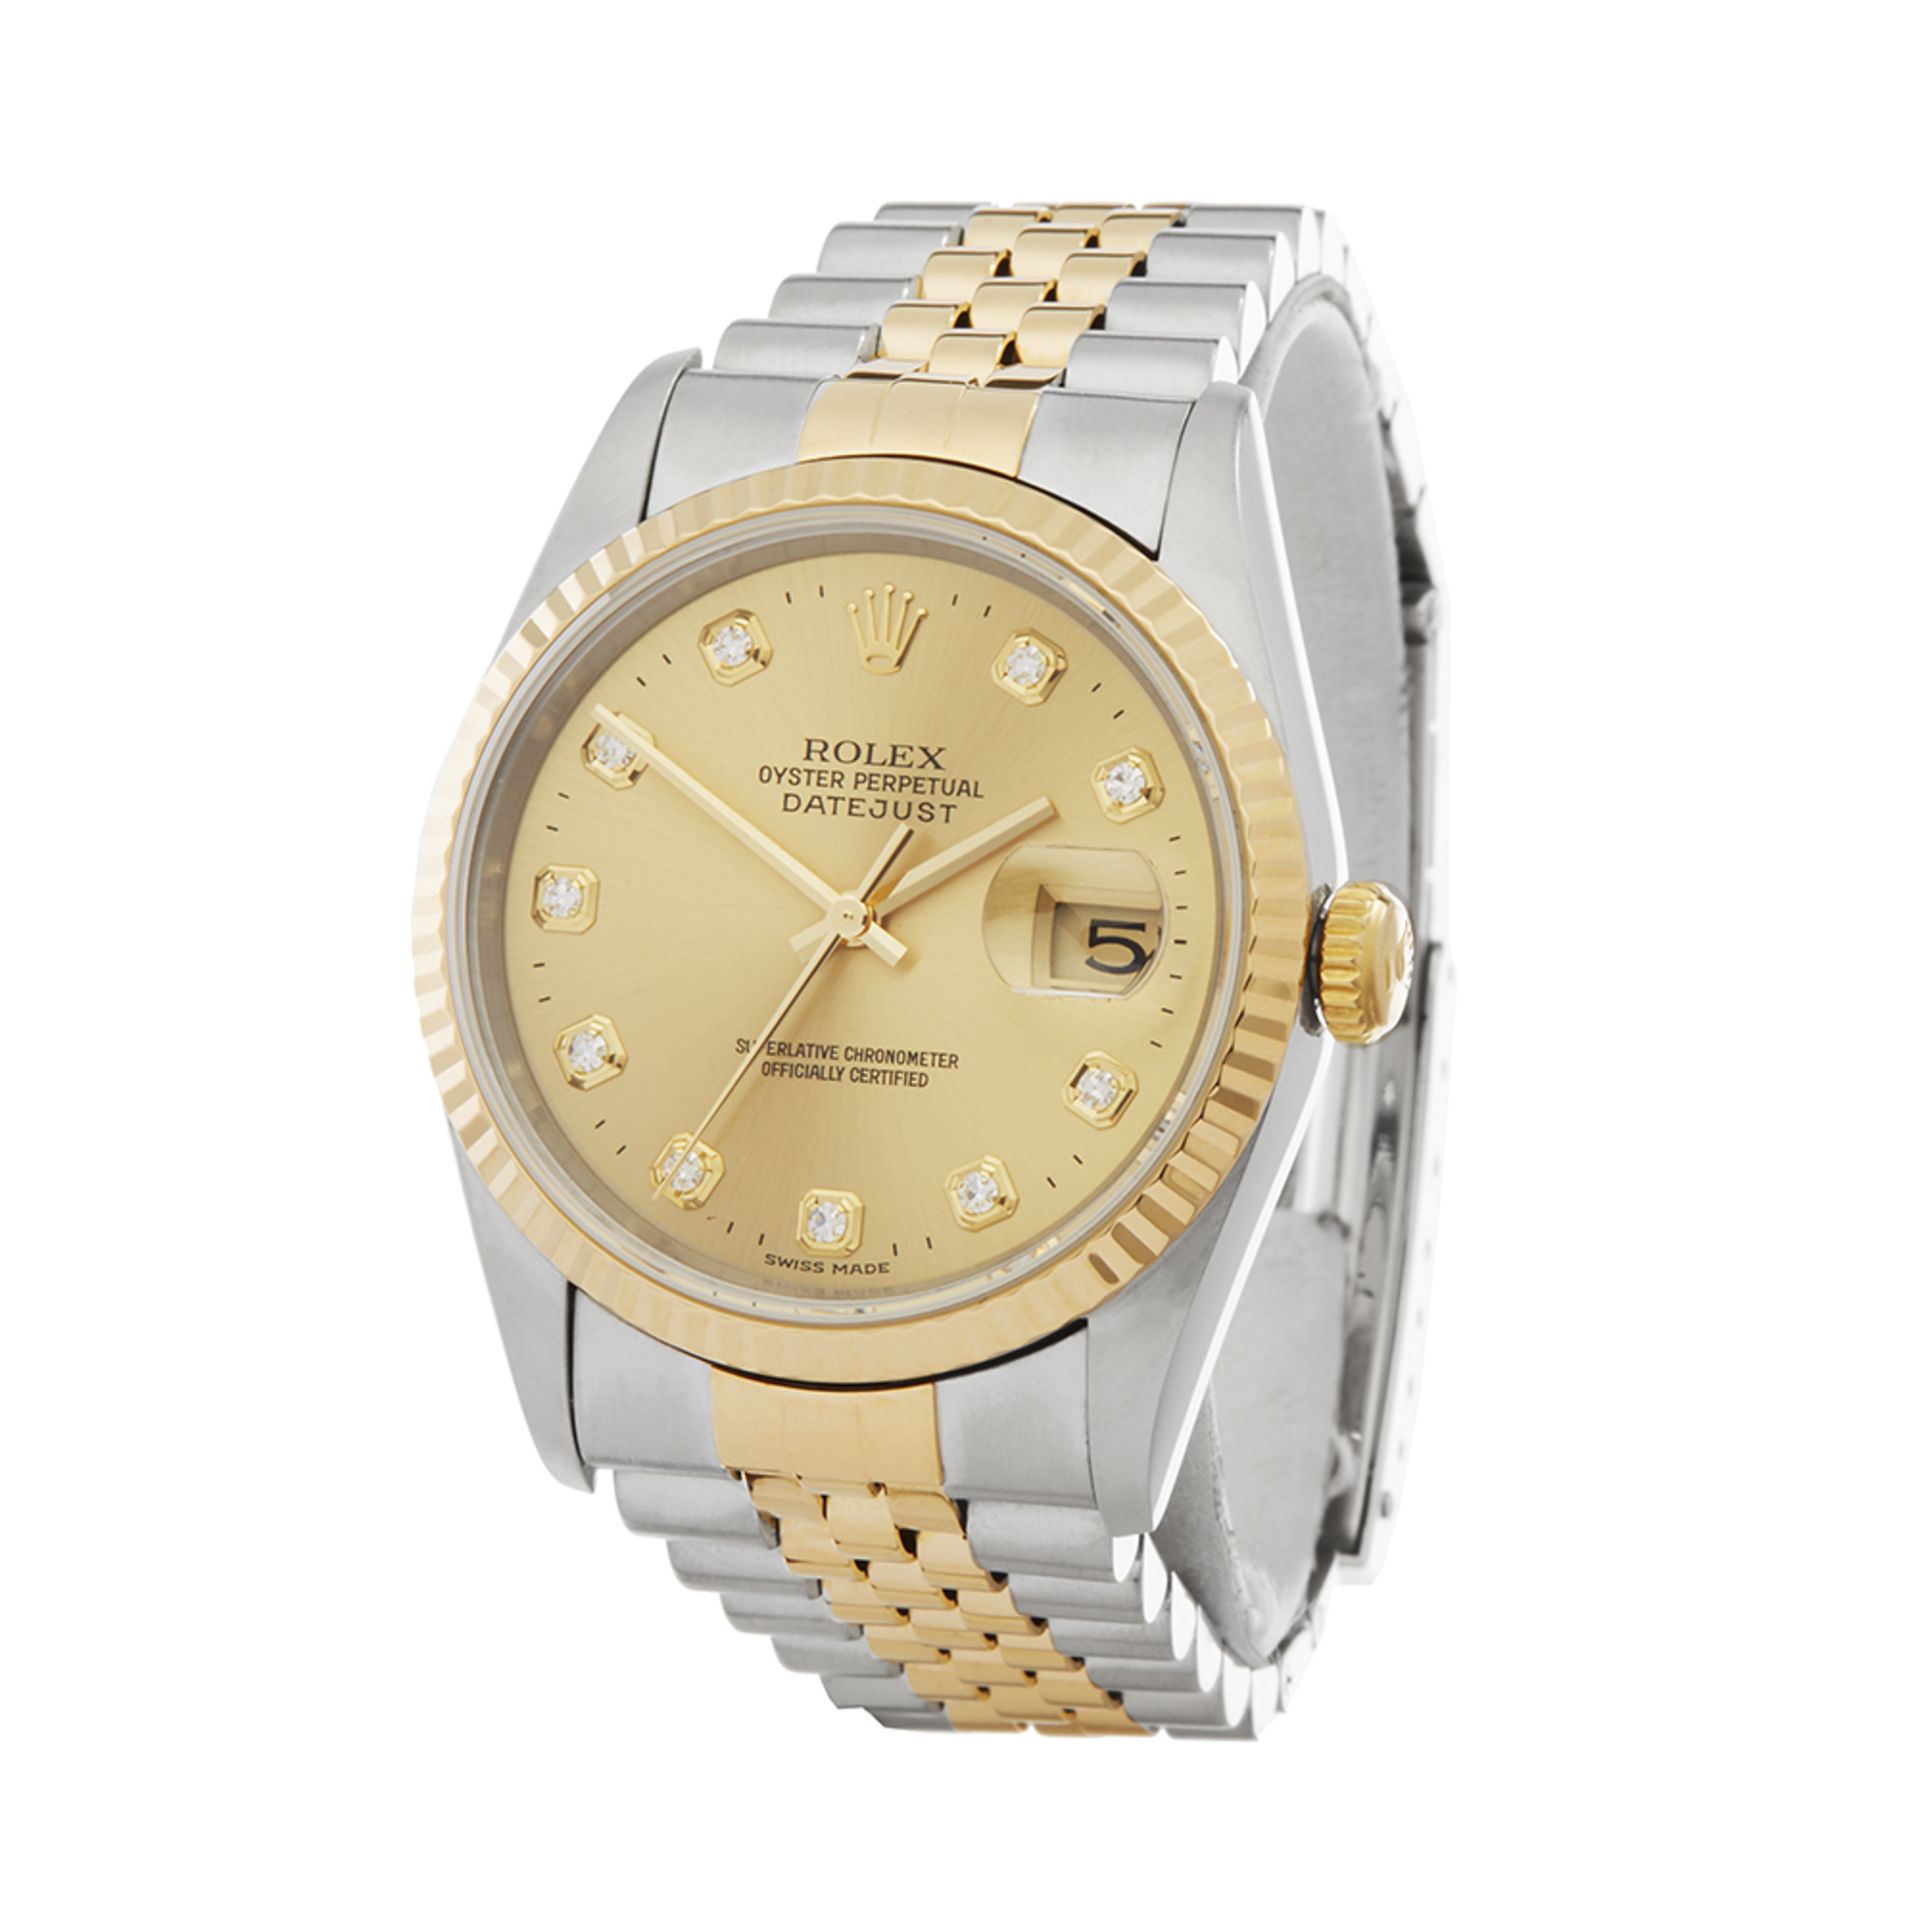 Rolex Datejust 36 Stainless Steel & 18K Yellow Gold - 16233 - Image 3 of 7